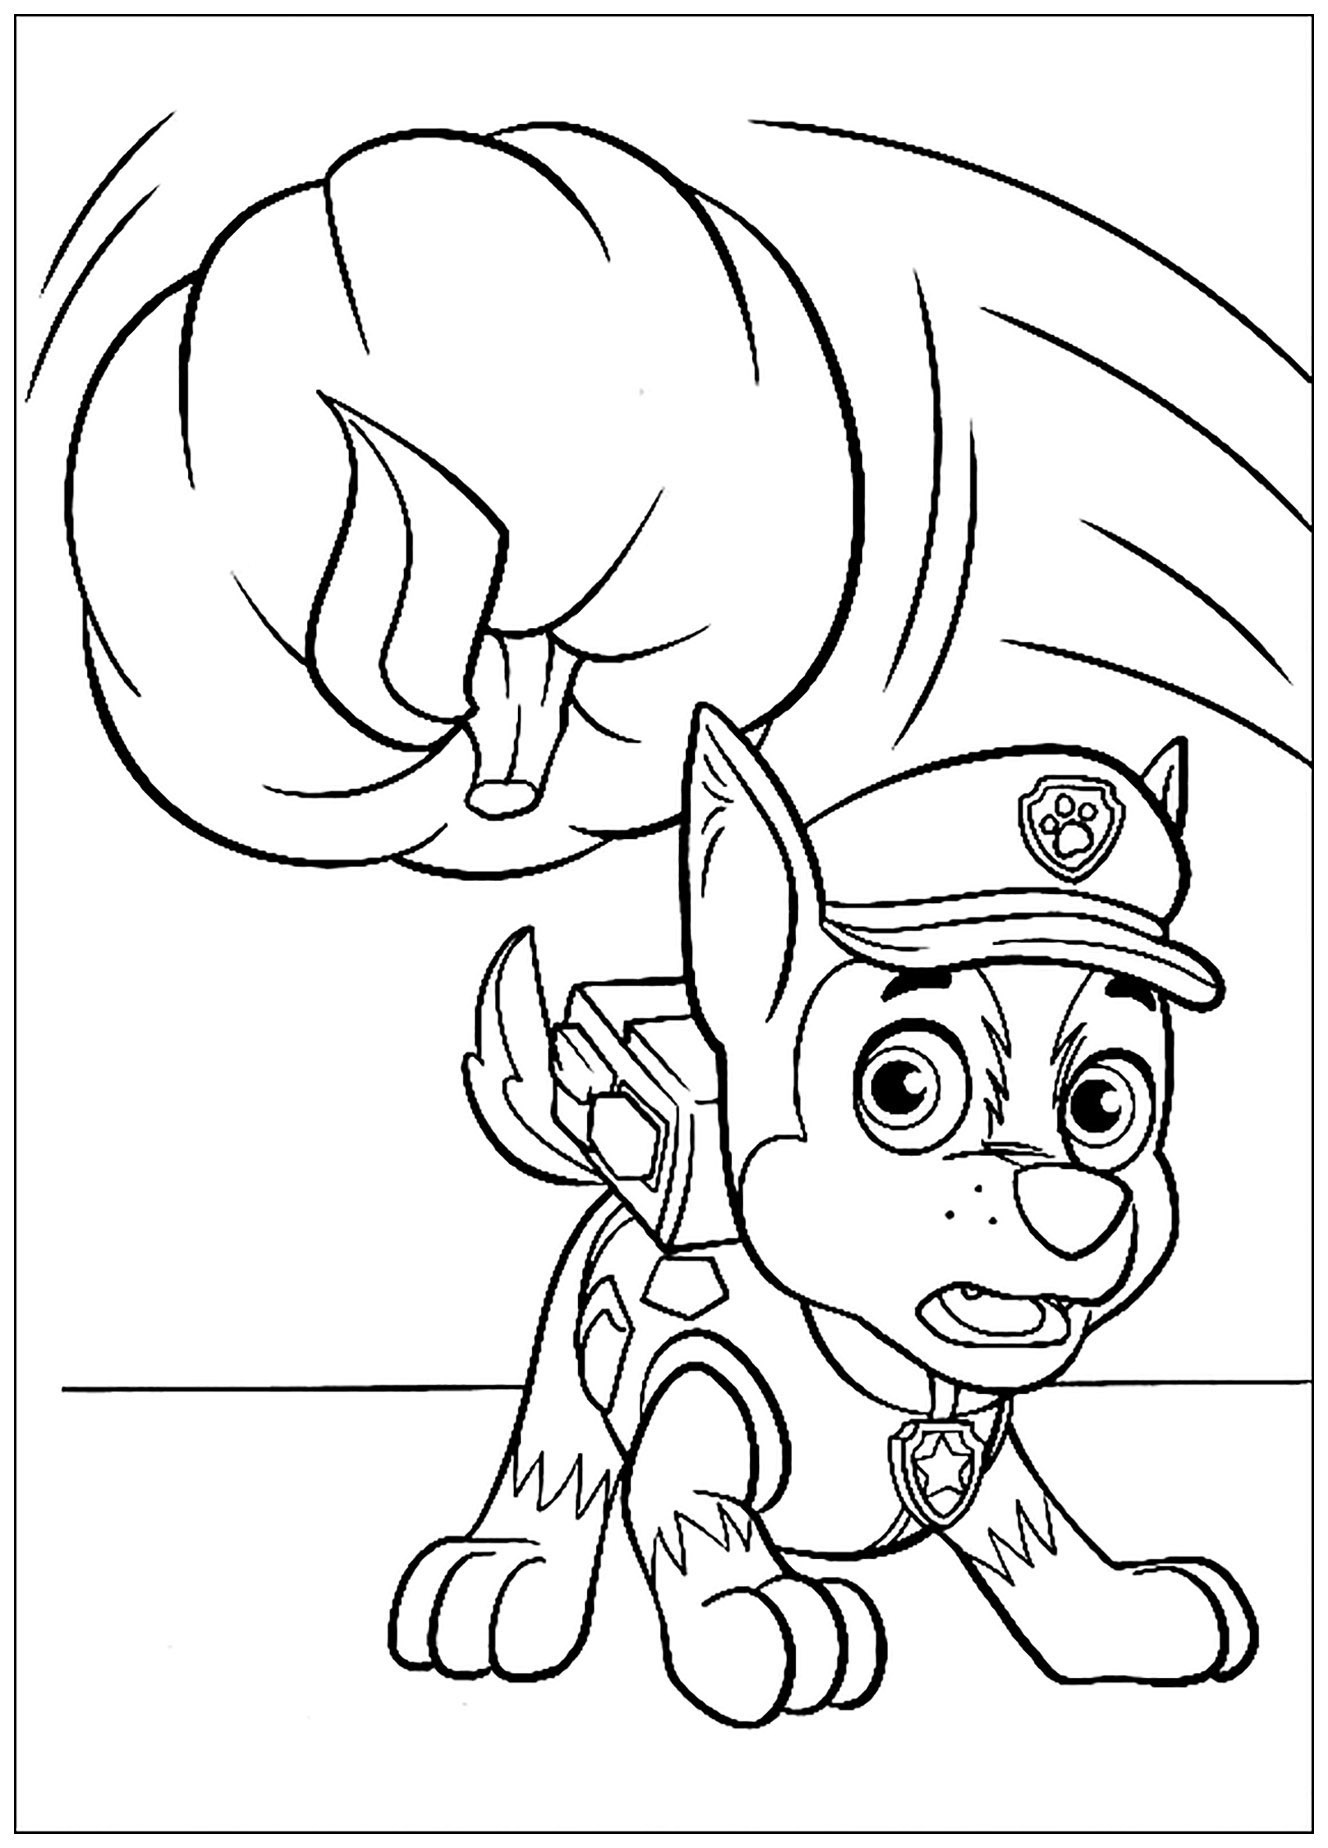 Coloriage Patpatrouille Beau Photos Paw Patrol to Color for Kids Paw Patrol Kids Coloring Pages